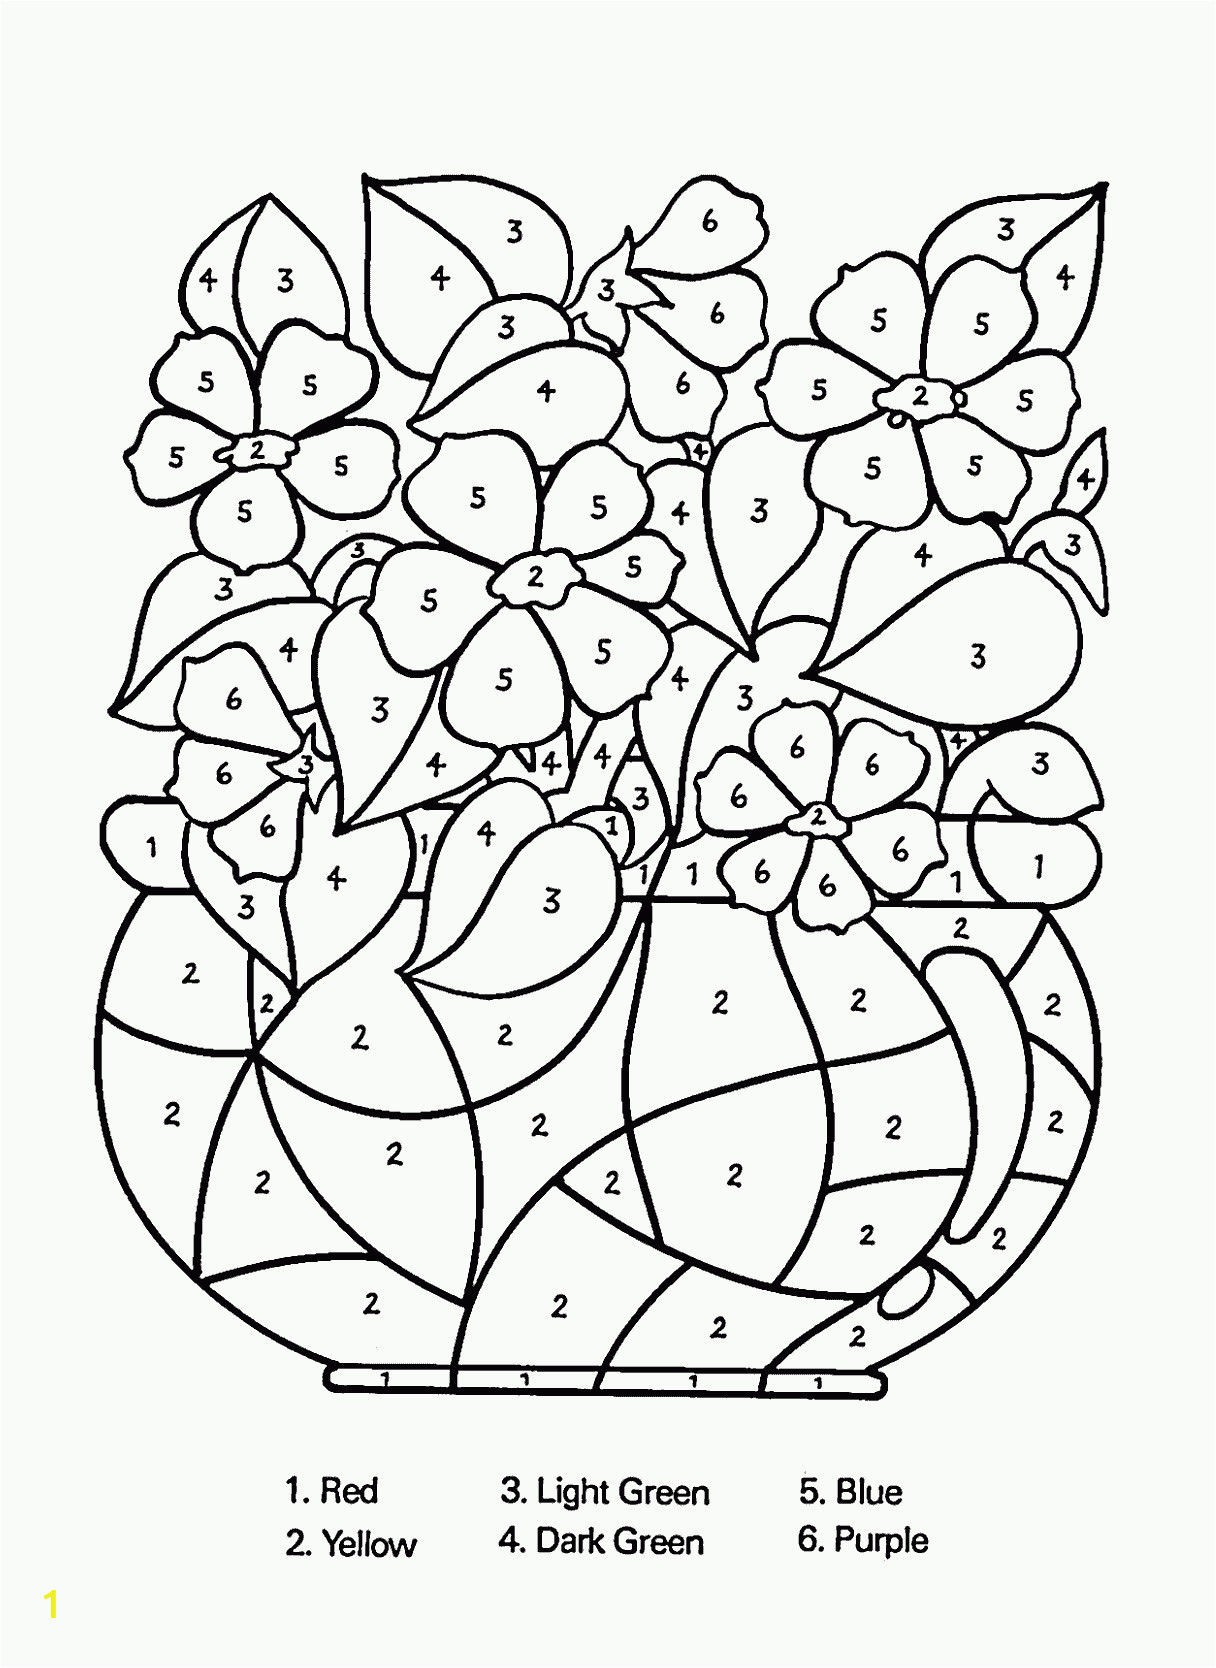 thanksgiving coloring pages oriental trading fun color by turkey number printables letter worksheets halloween free with numbers sides funny day dishes wreath ideas